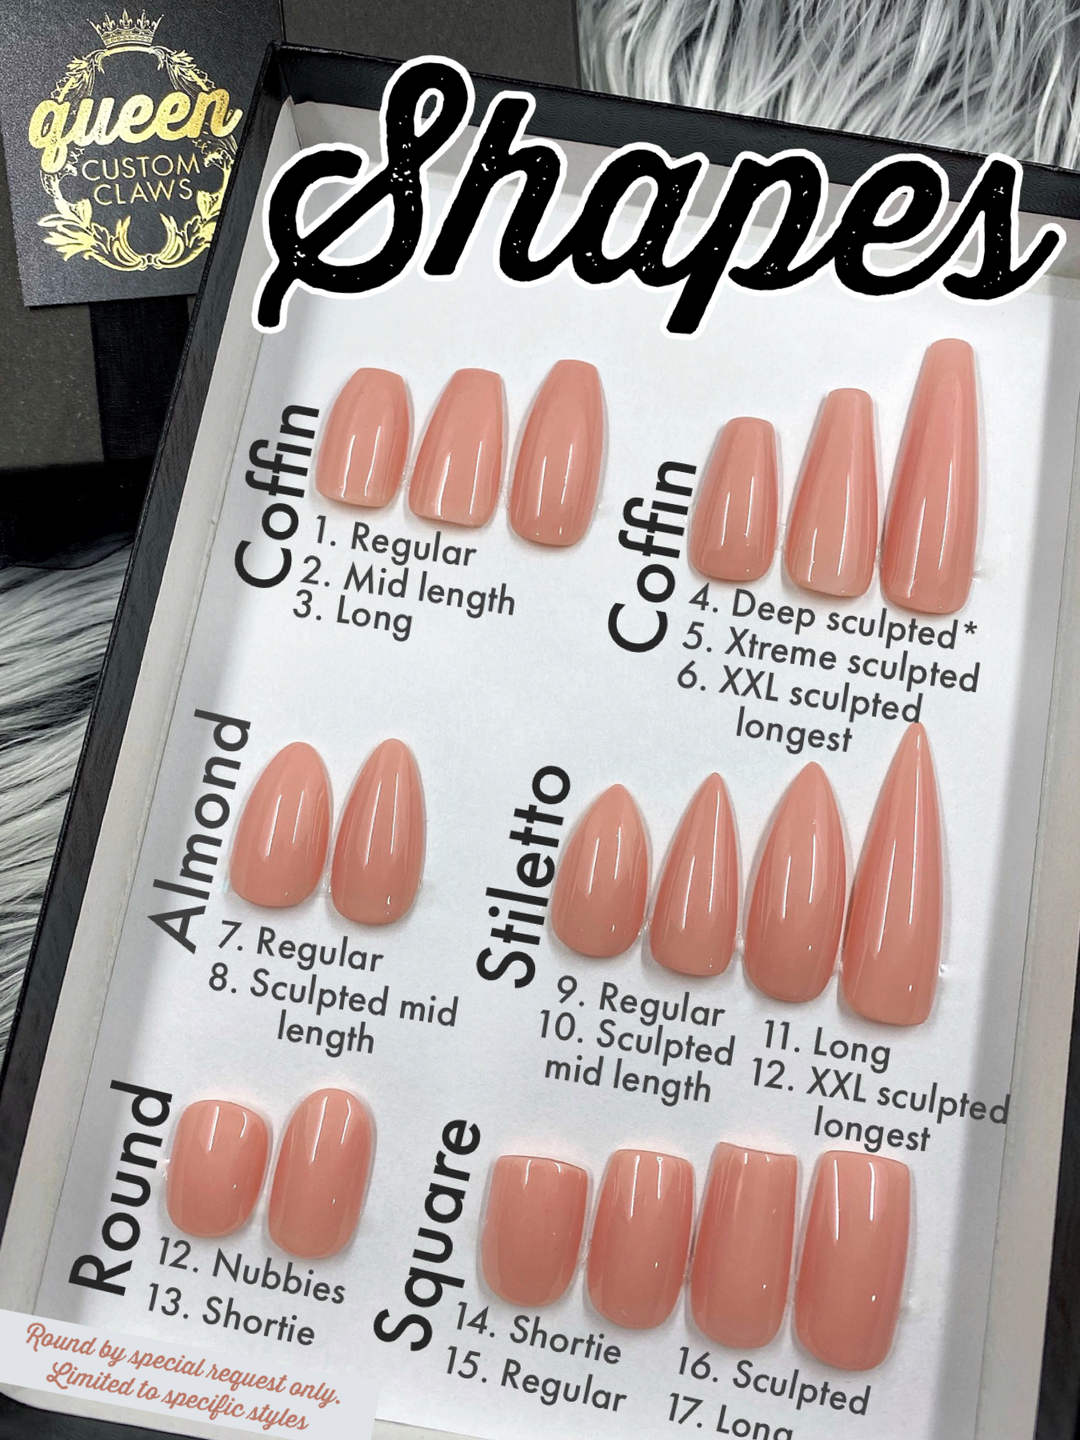 Fit Kit for press-on nails